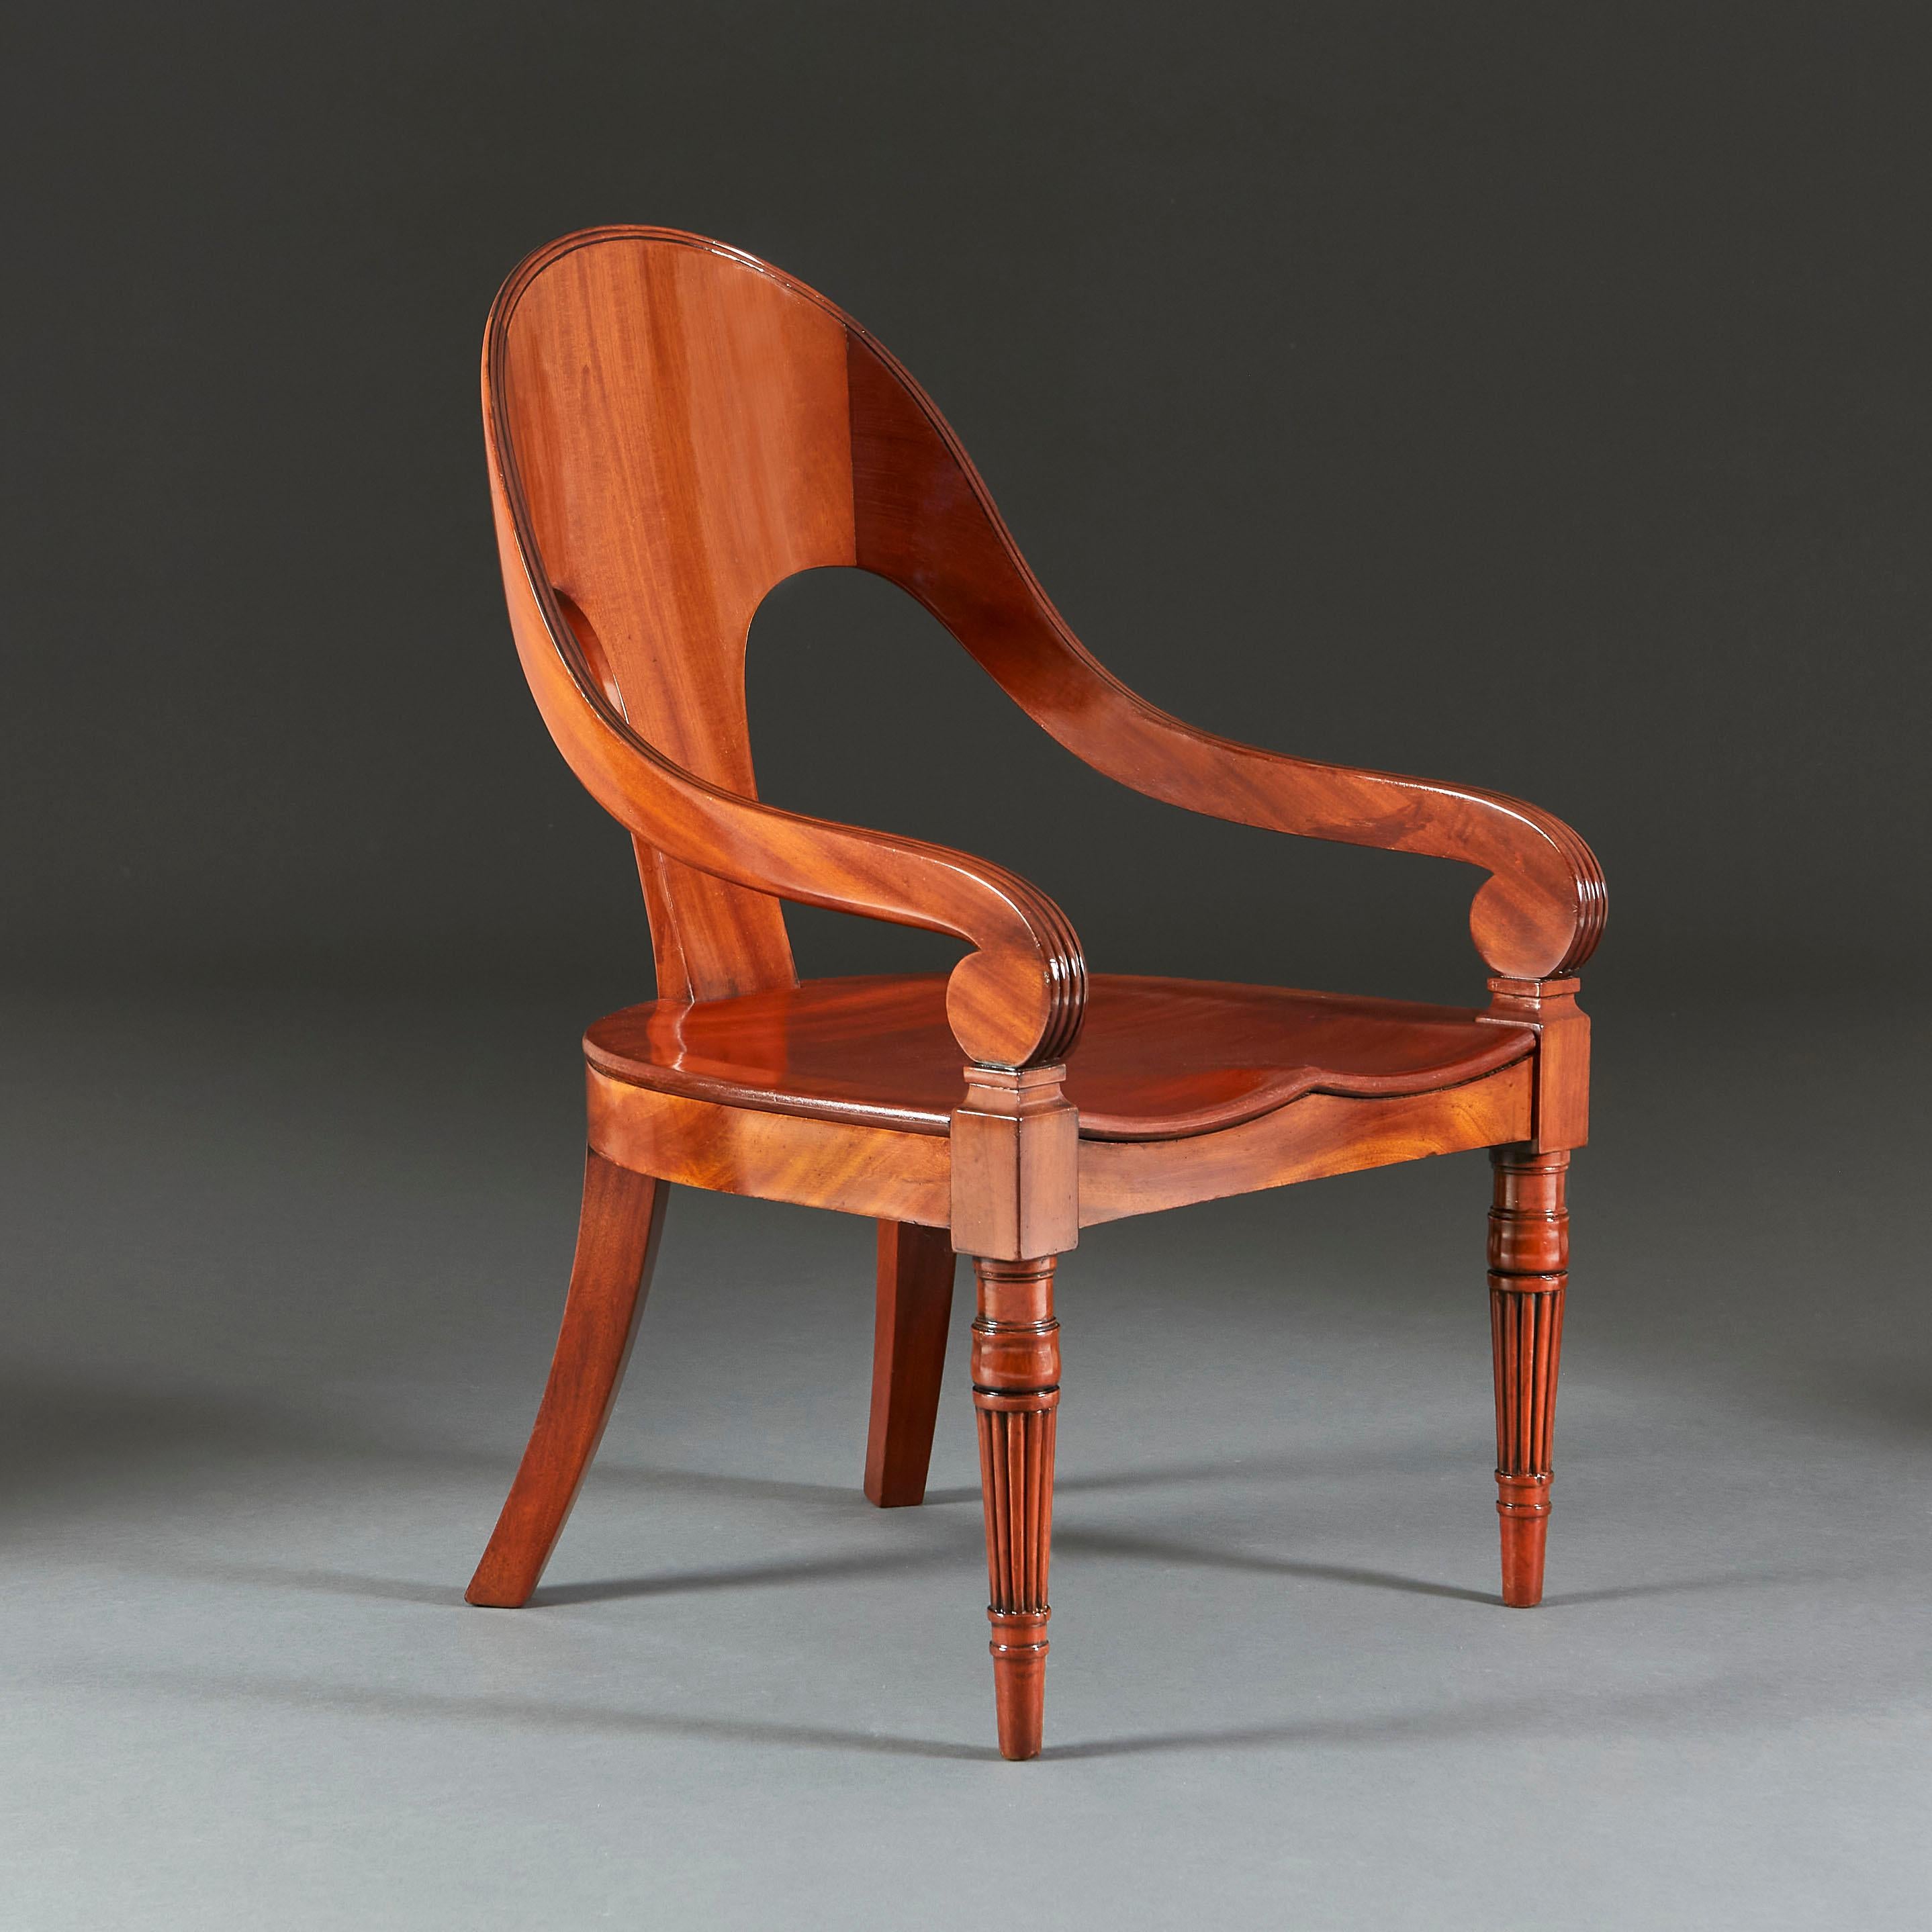 An early nineteenth century mahogany klismos chair with curved back, saddle seat, supported on fluted feet.